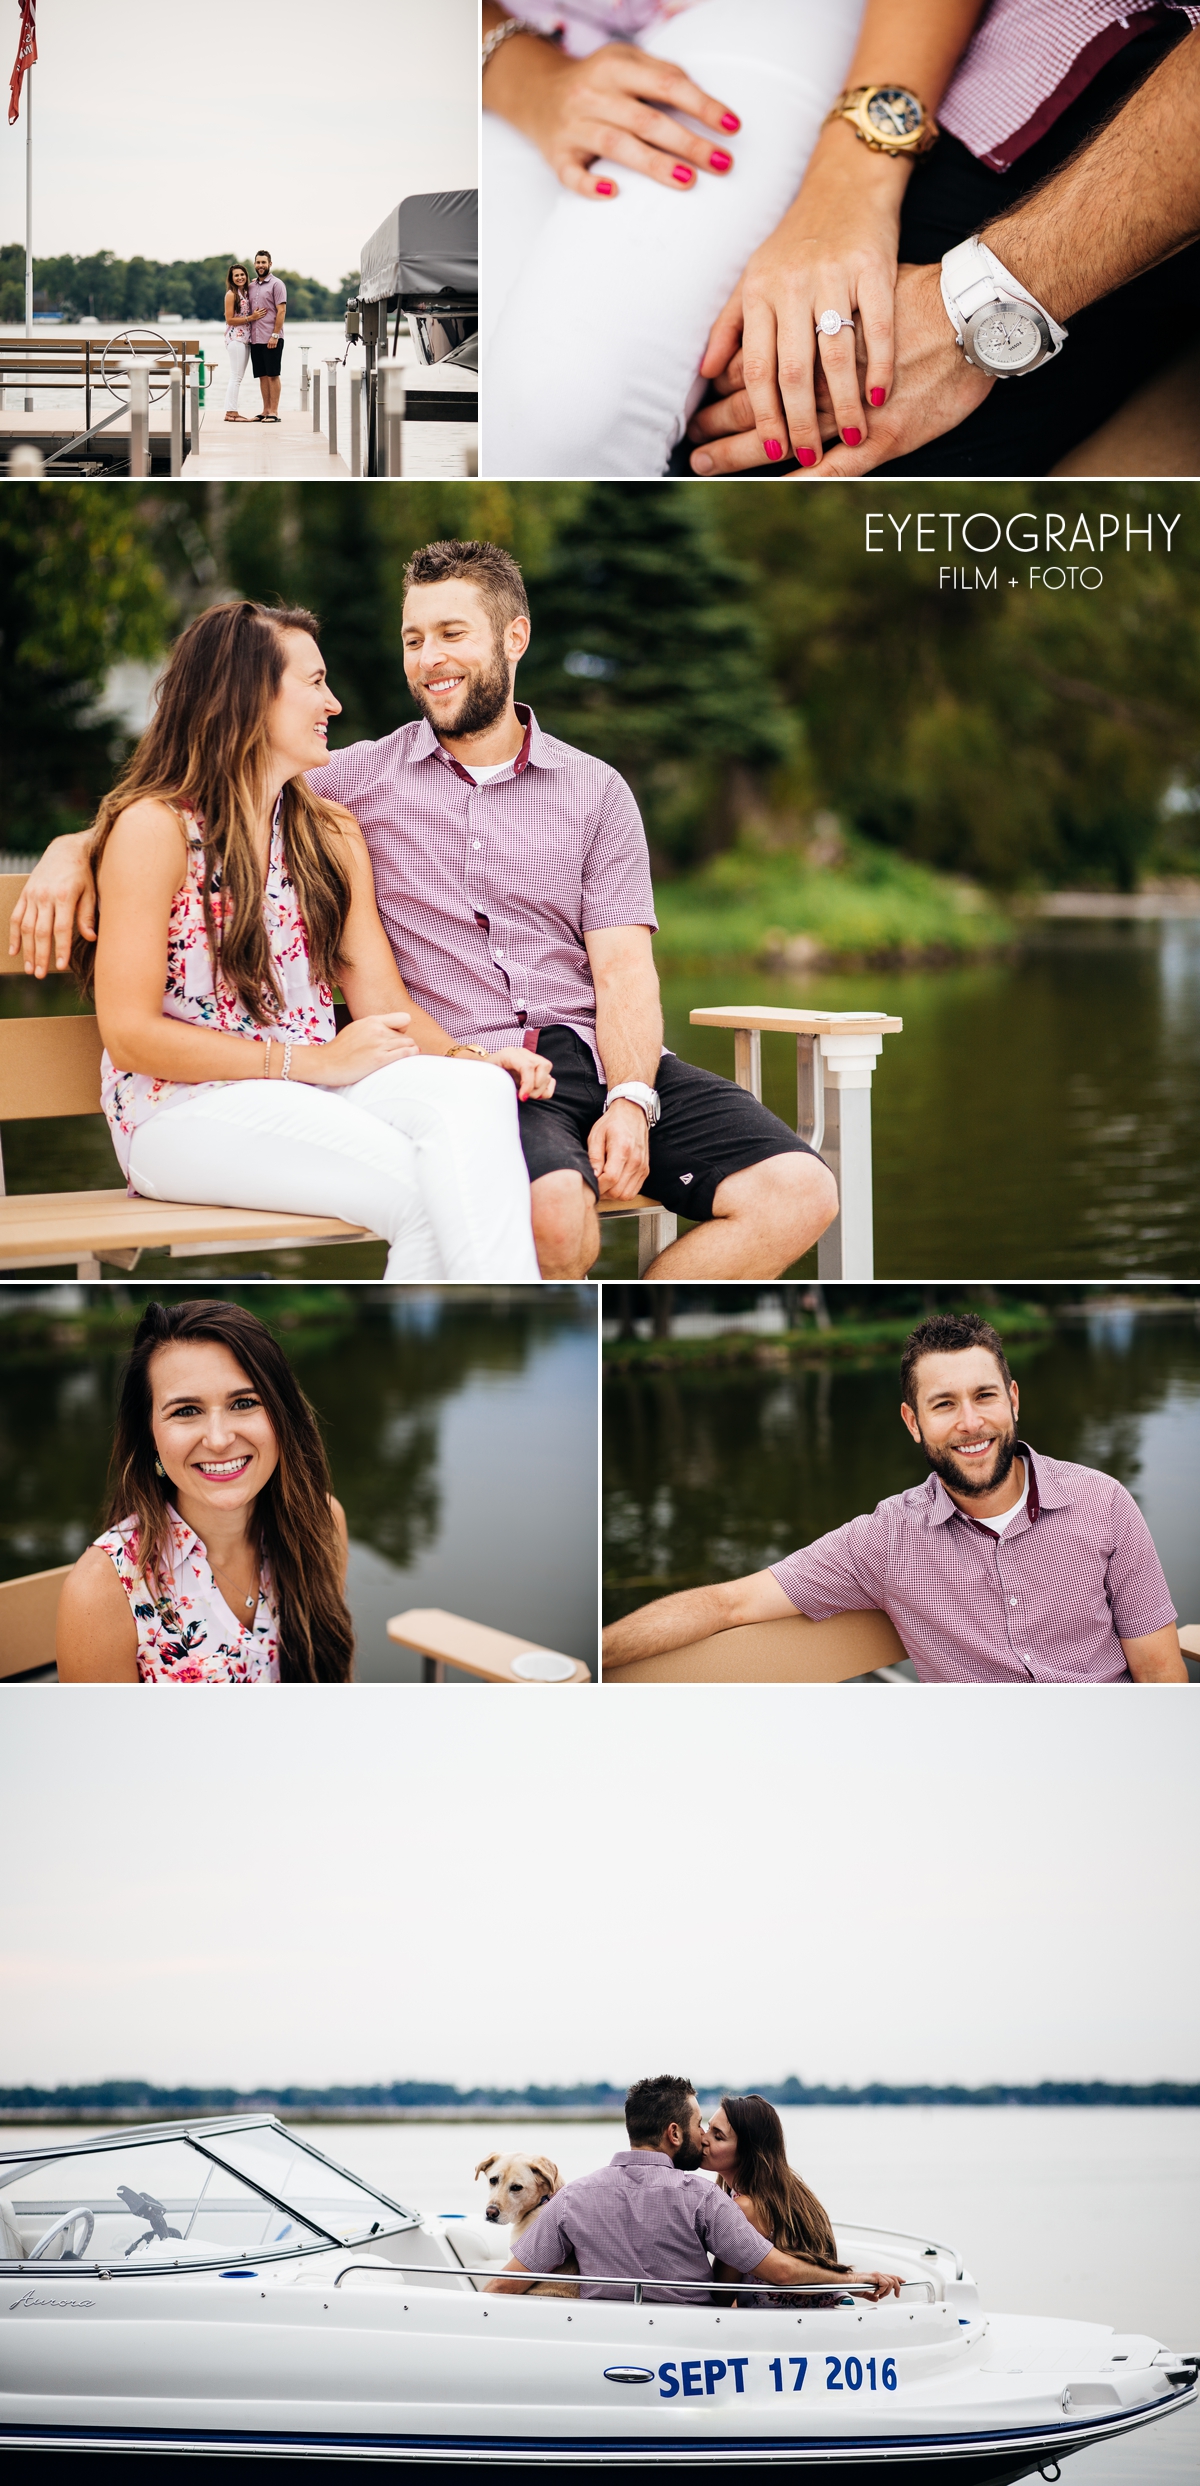 Engagement Session on a Lake | Andrea + Chris | Eyetography Film + Foto Minneapolis, MN 2